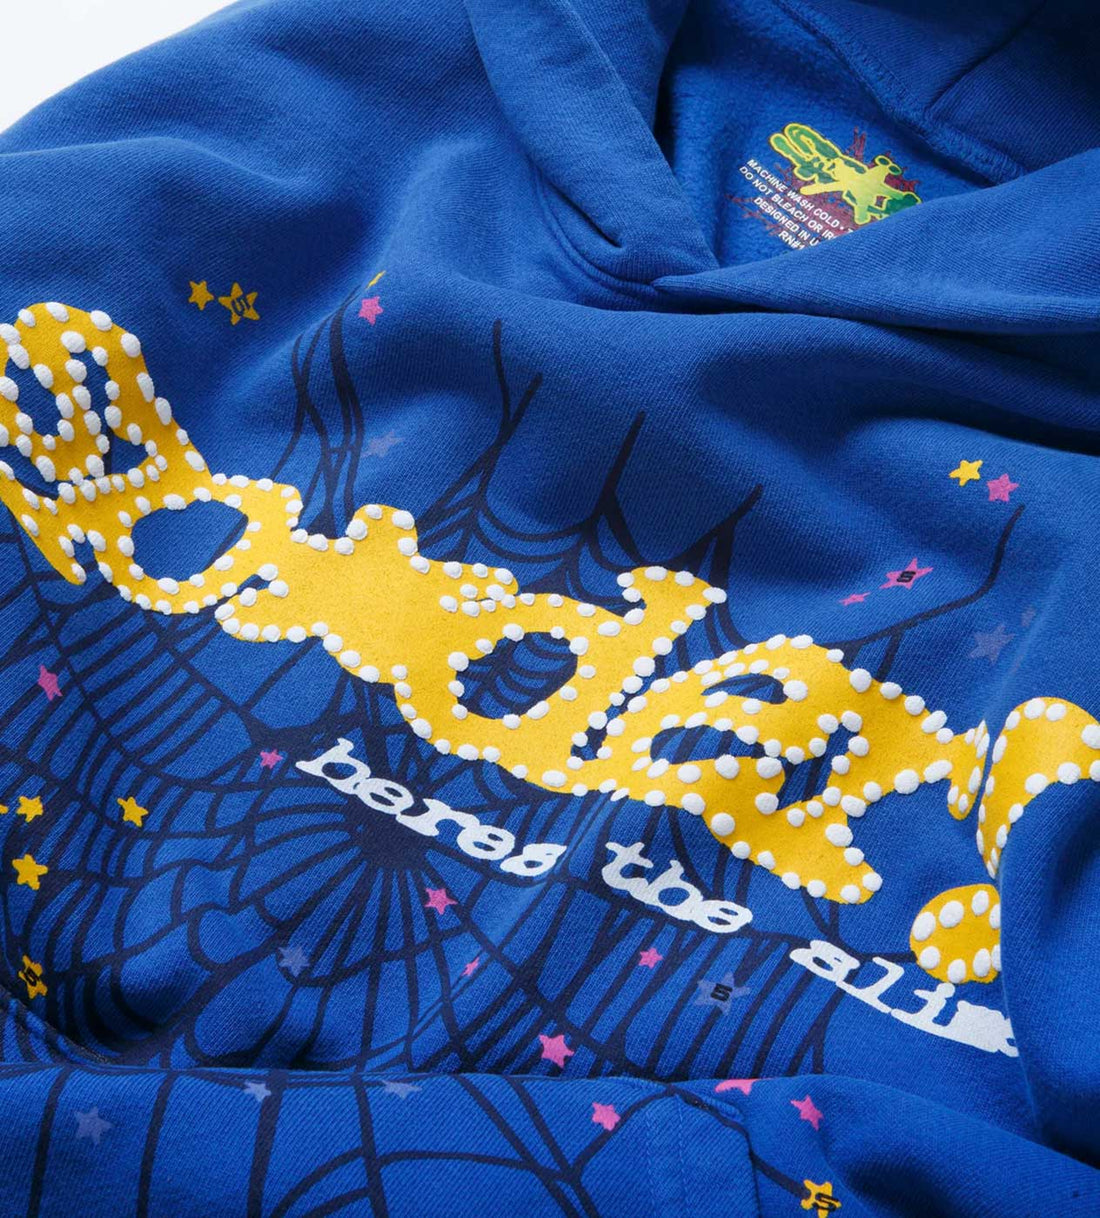 Sp5der Worldwide Marina Hoodie Blue Back View close up front view